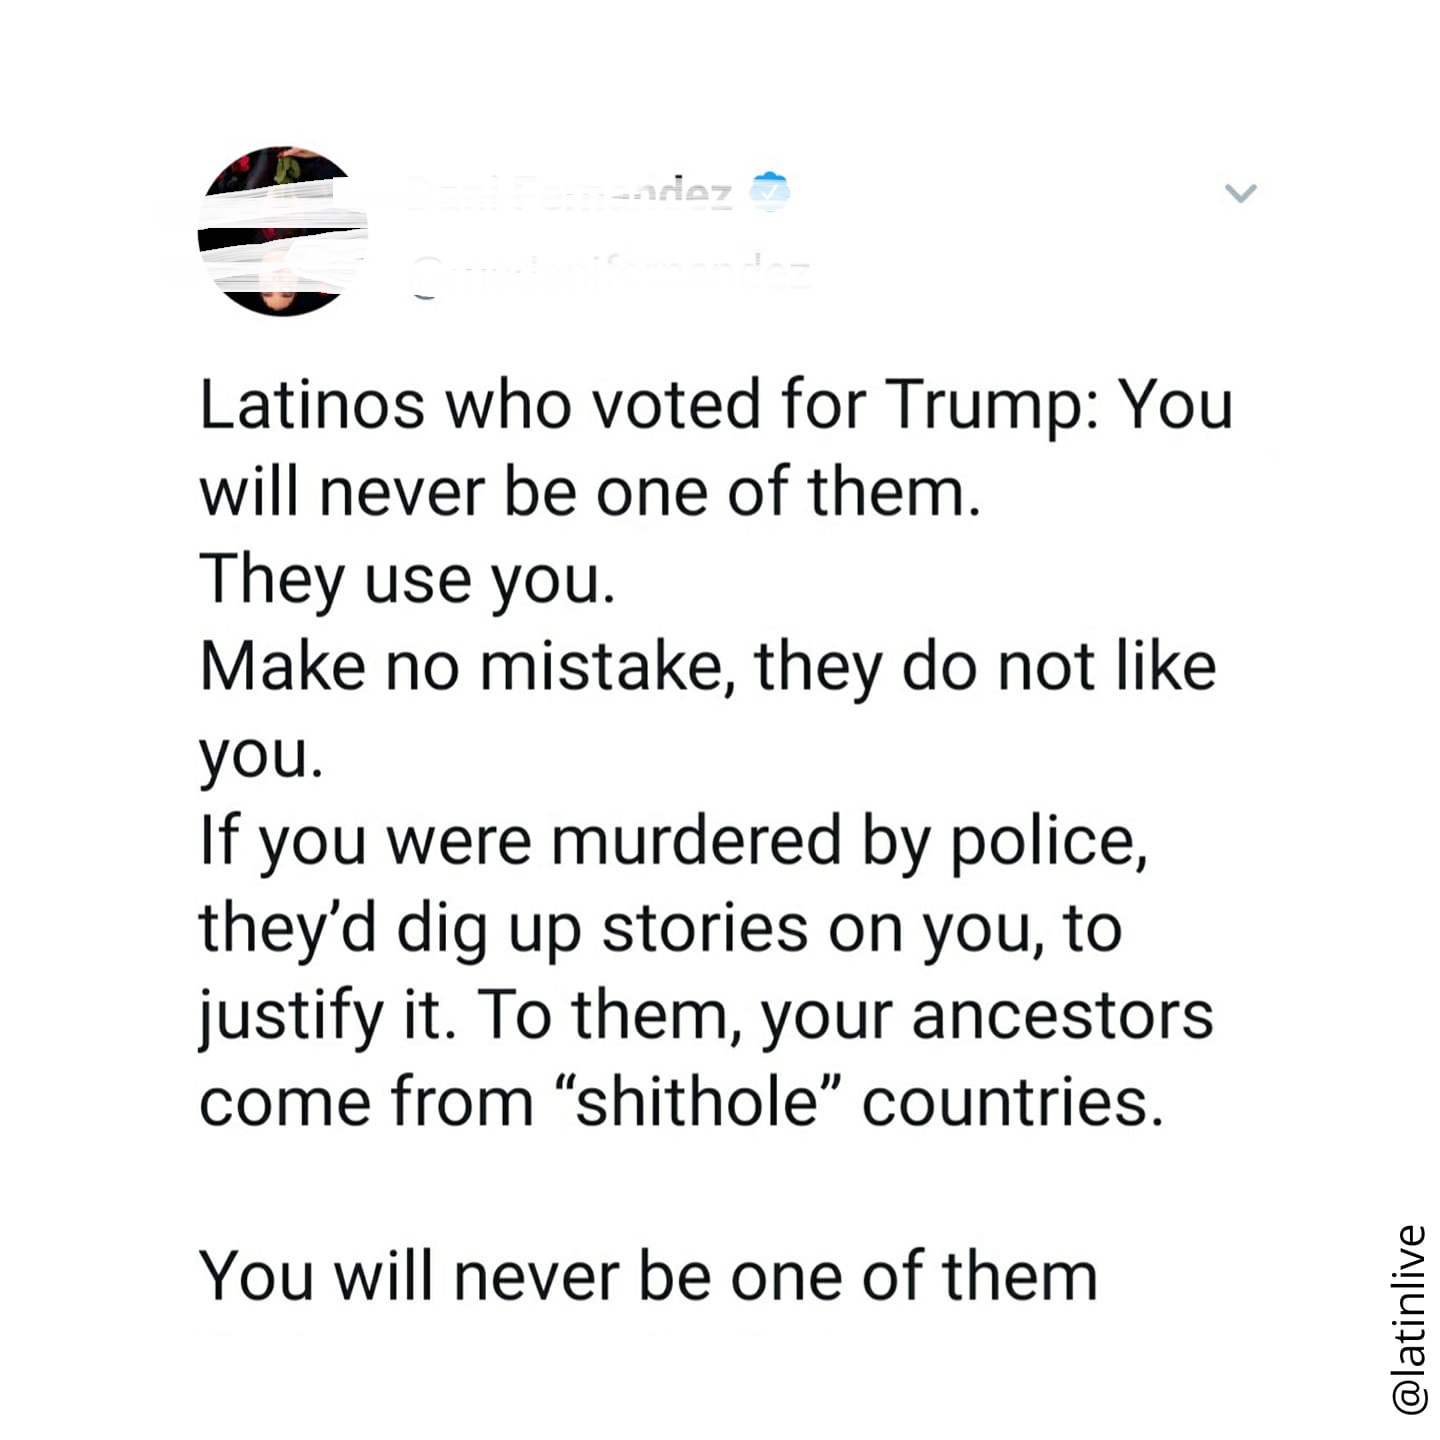 angle - adiez Latinos who voted for Trump You will never be one of them. They use you. Make no mistake, they do not you. If you were murdered by police, they'd dig up stories on you, to justify it. To them, your ancestors come from shithole" countries. Yo